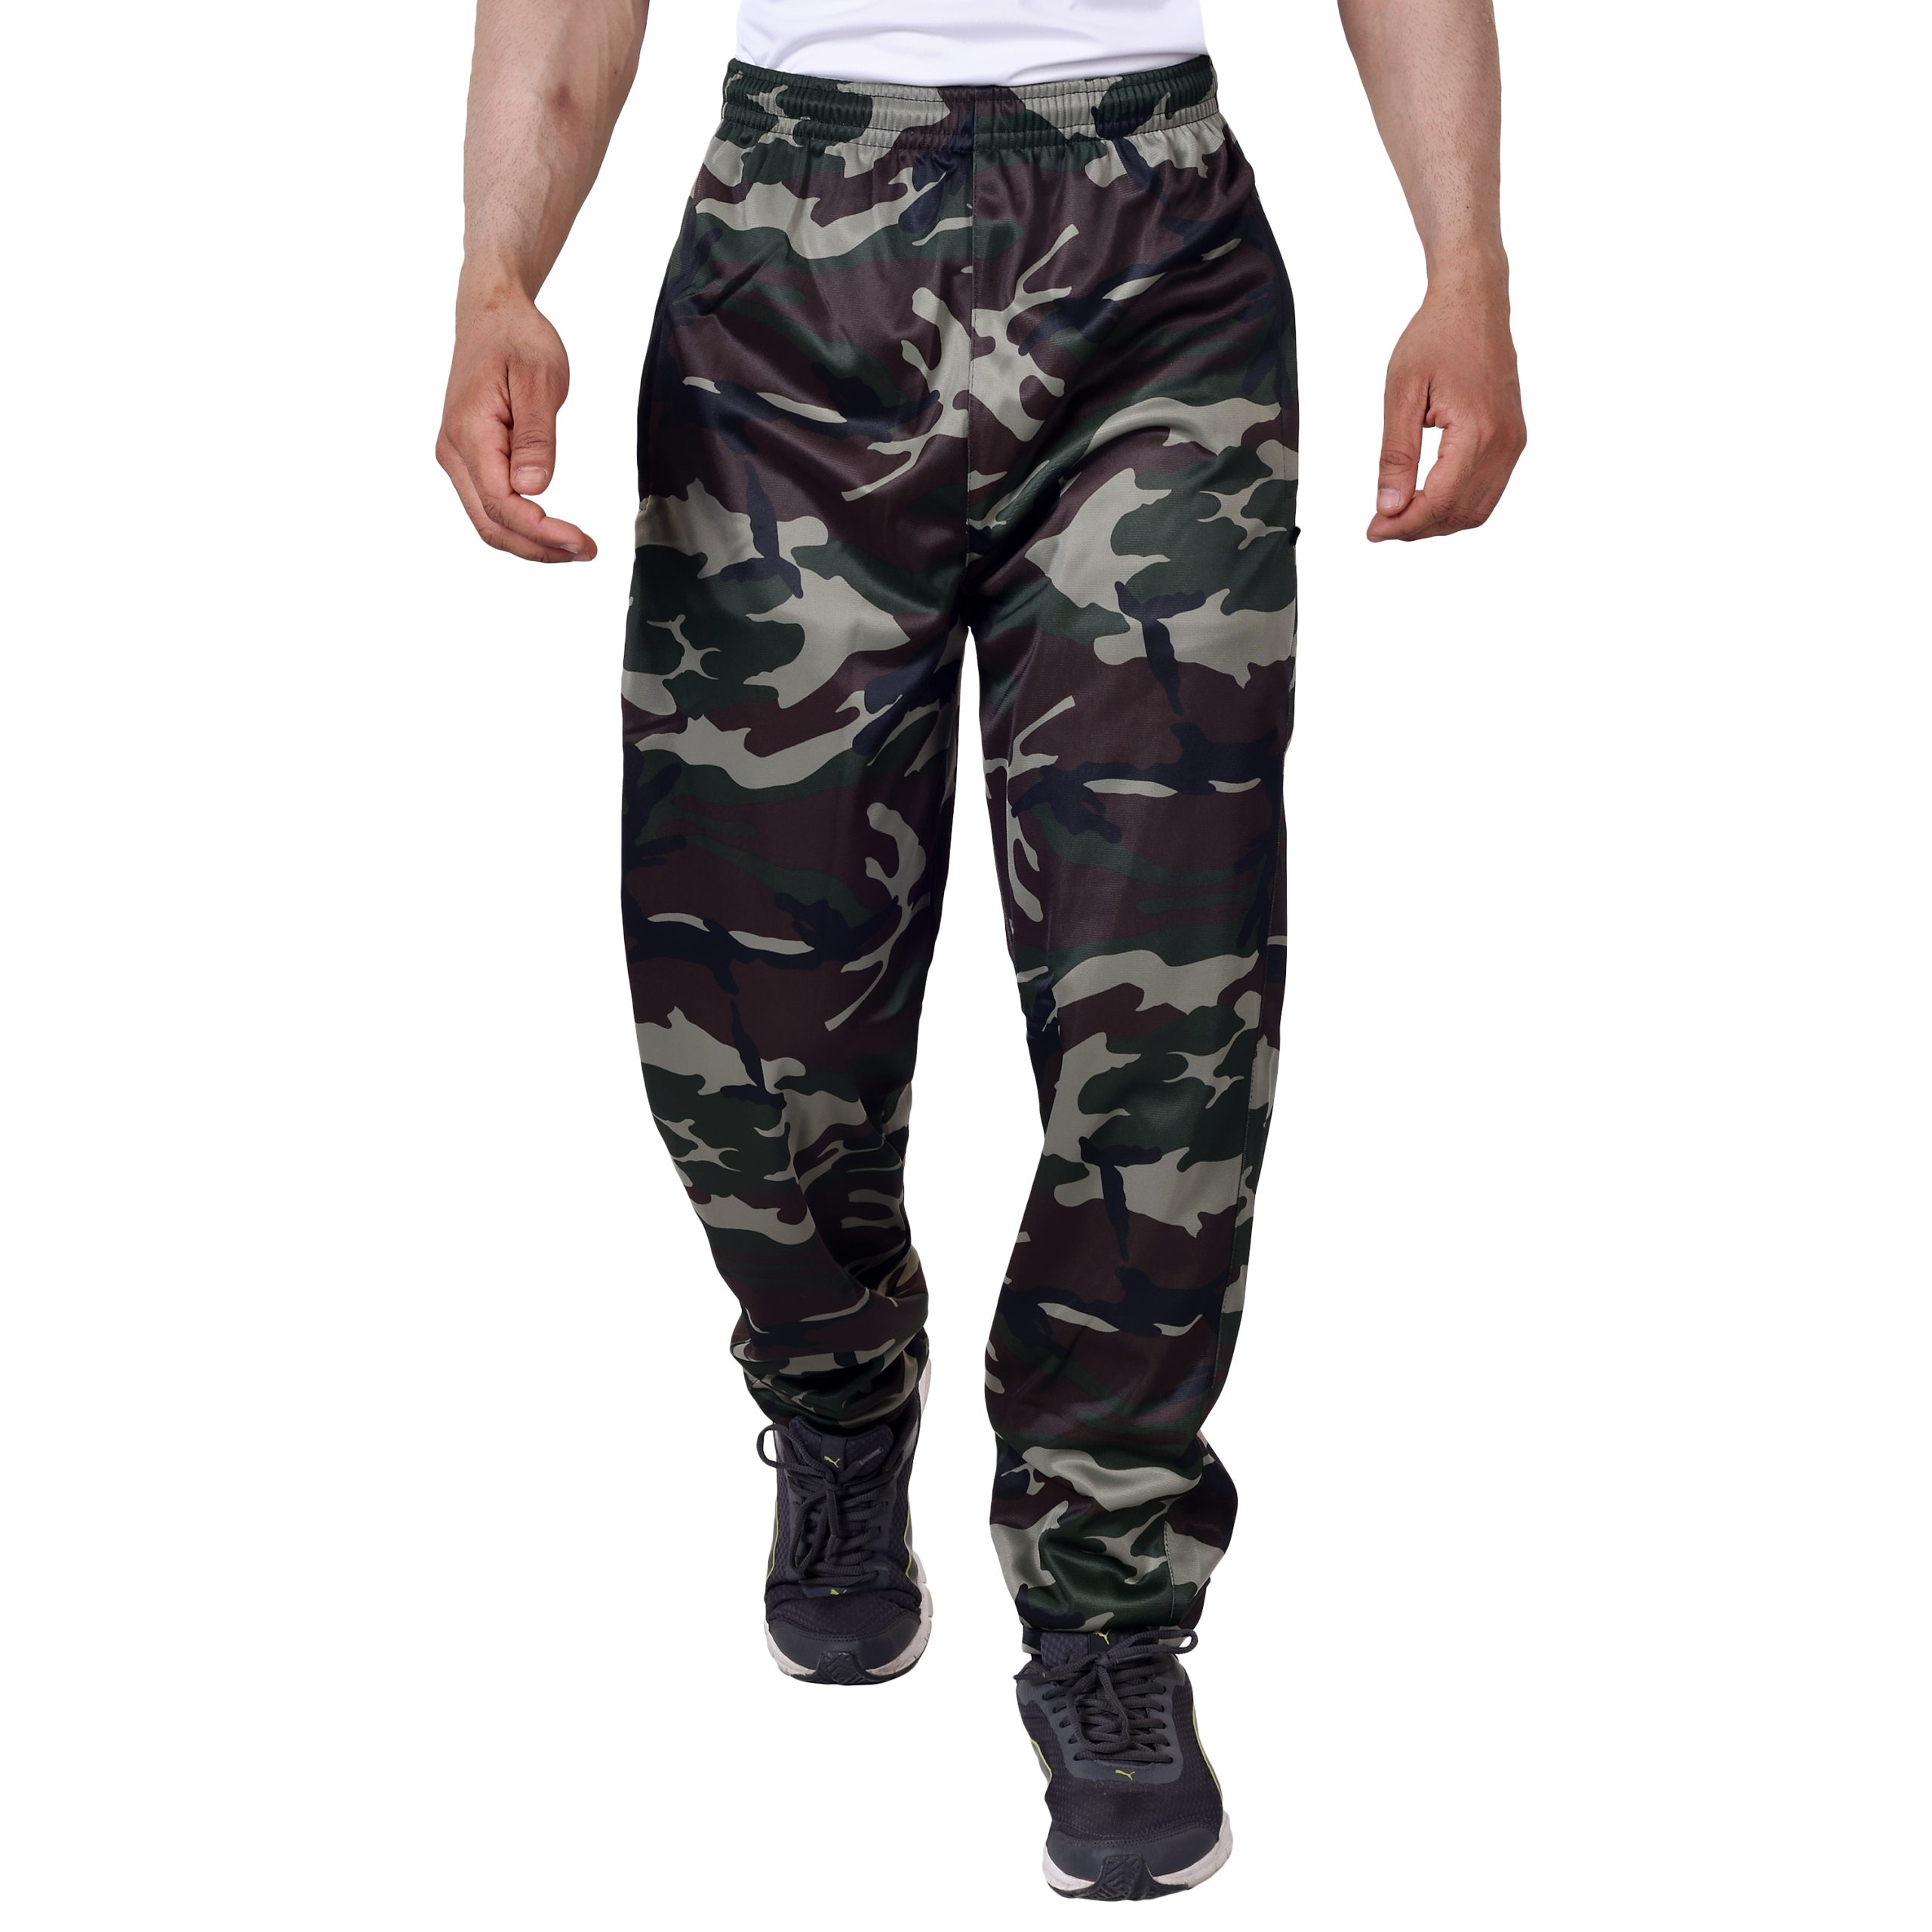 Trouseres Fall Camouflag Army Workwear men's Thick Hiking Sweatpants  Pants | eBay